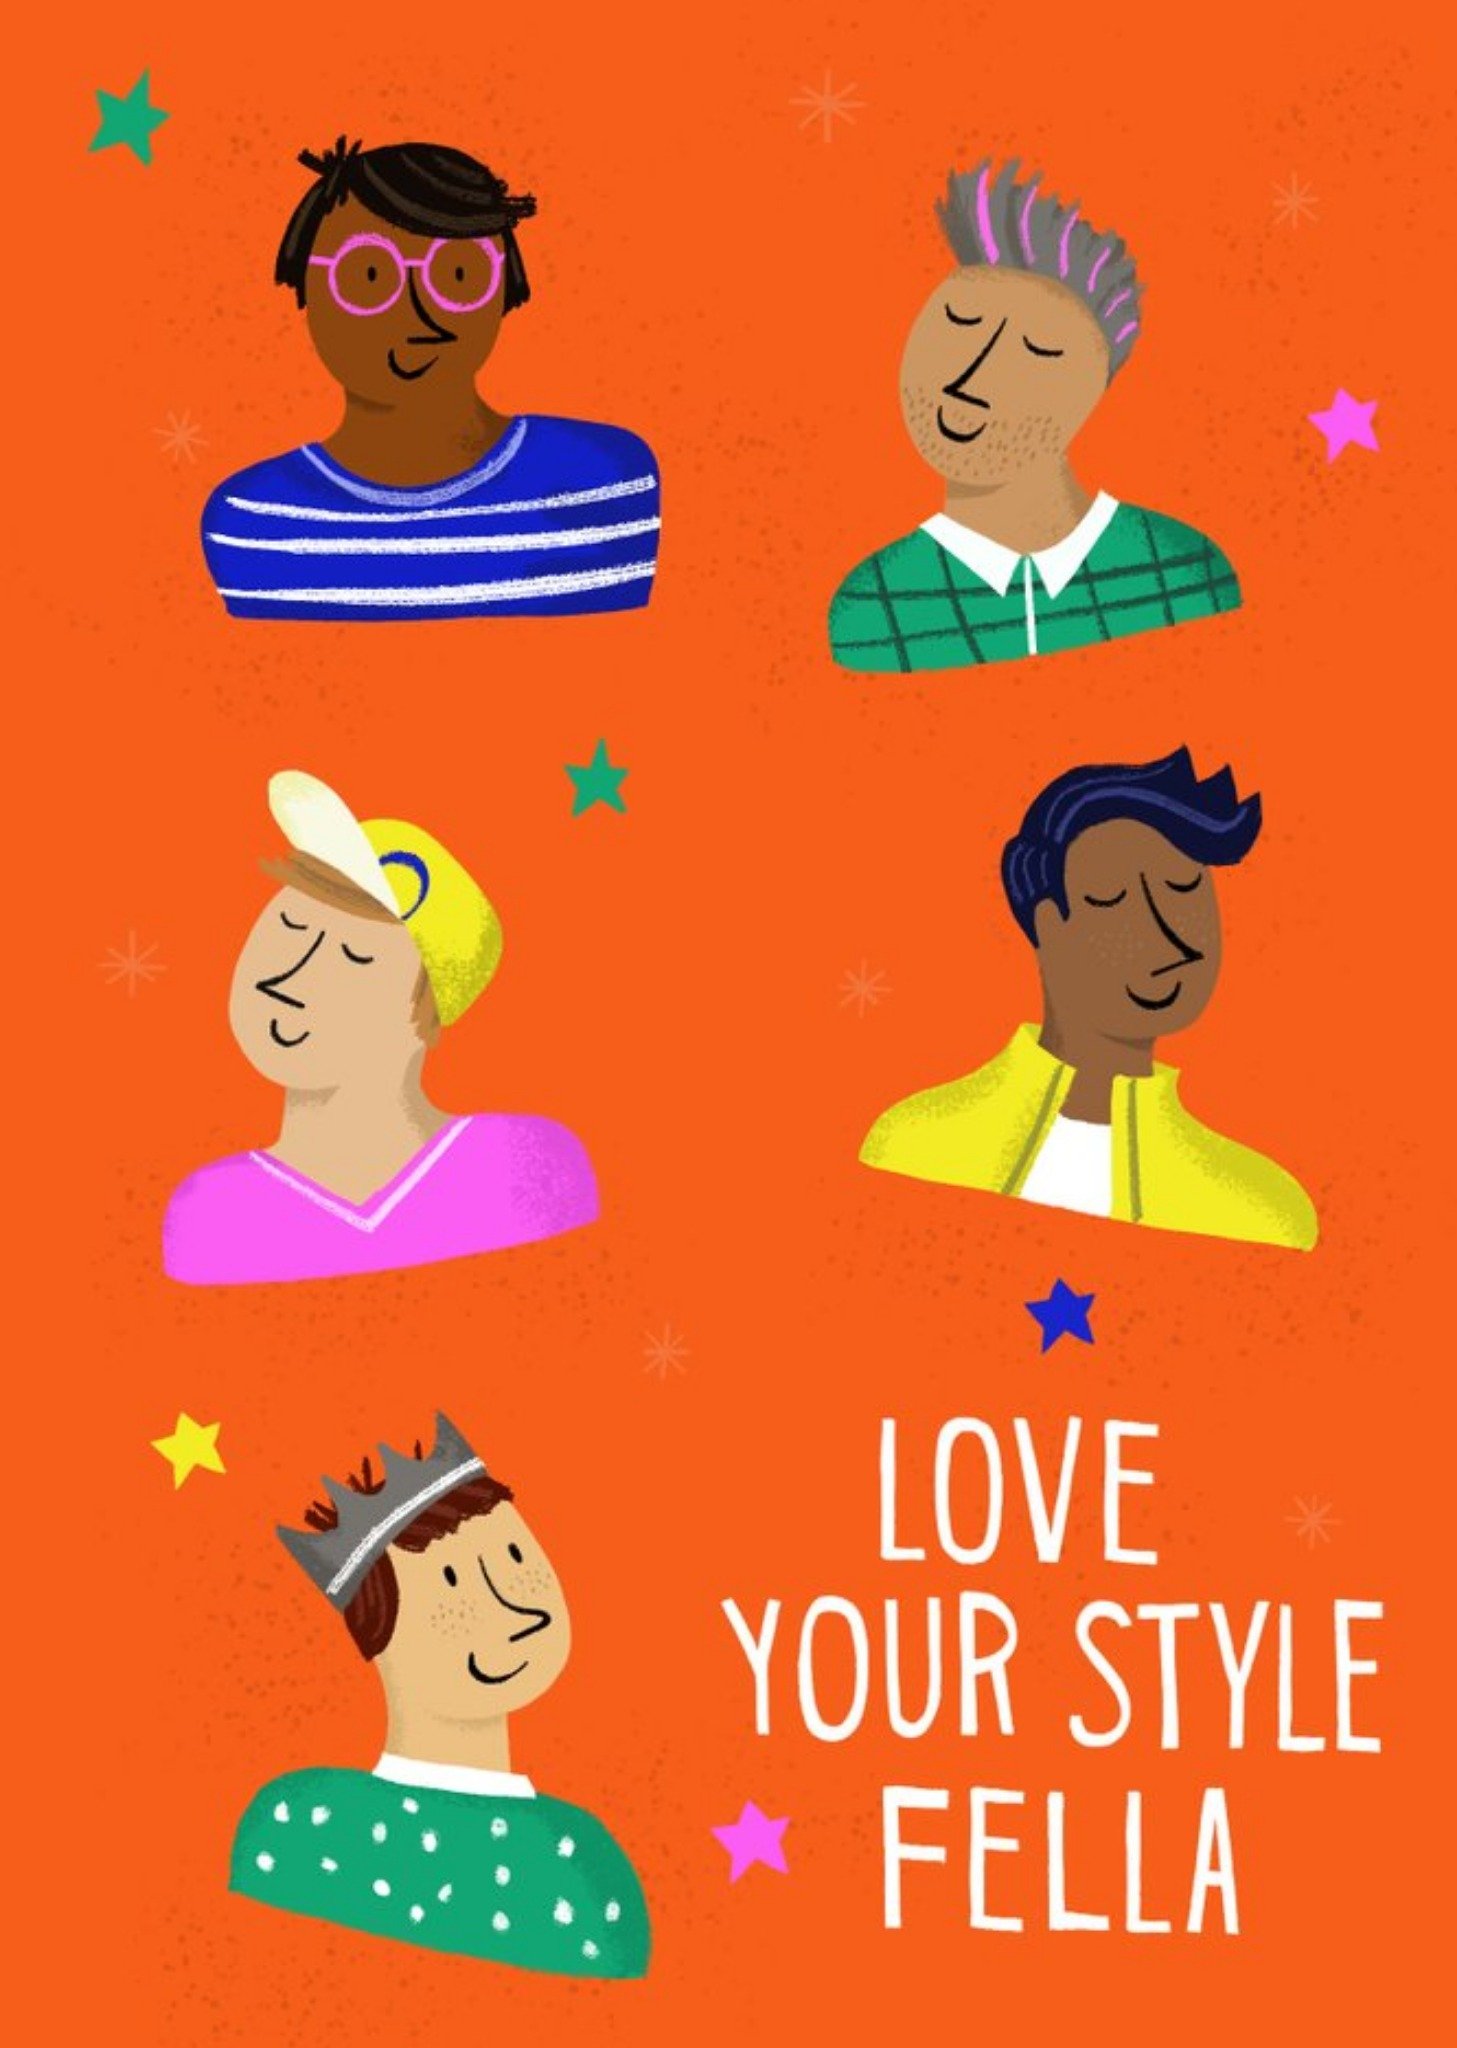 Moonpig Sinead Hanley Illustrated Diverse Men Love Your Style Fella Card, Large